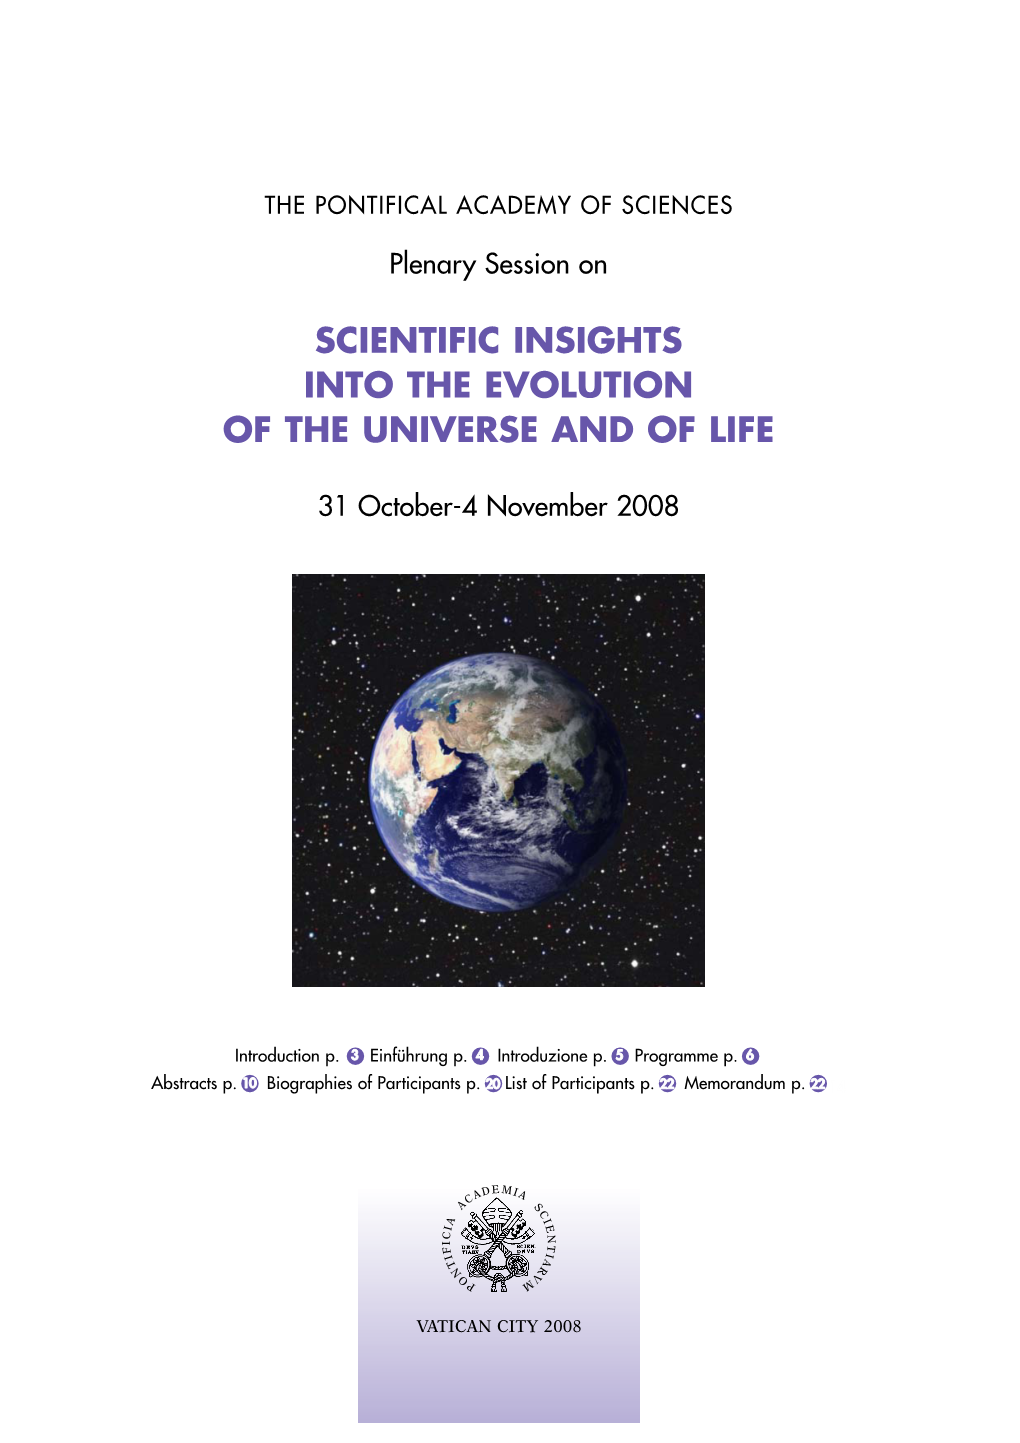 Scientific Insights Into the Evolution of the Universe and of Life